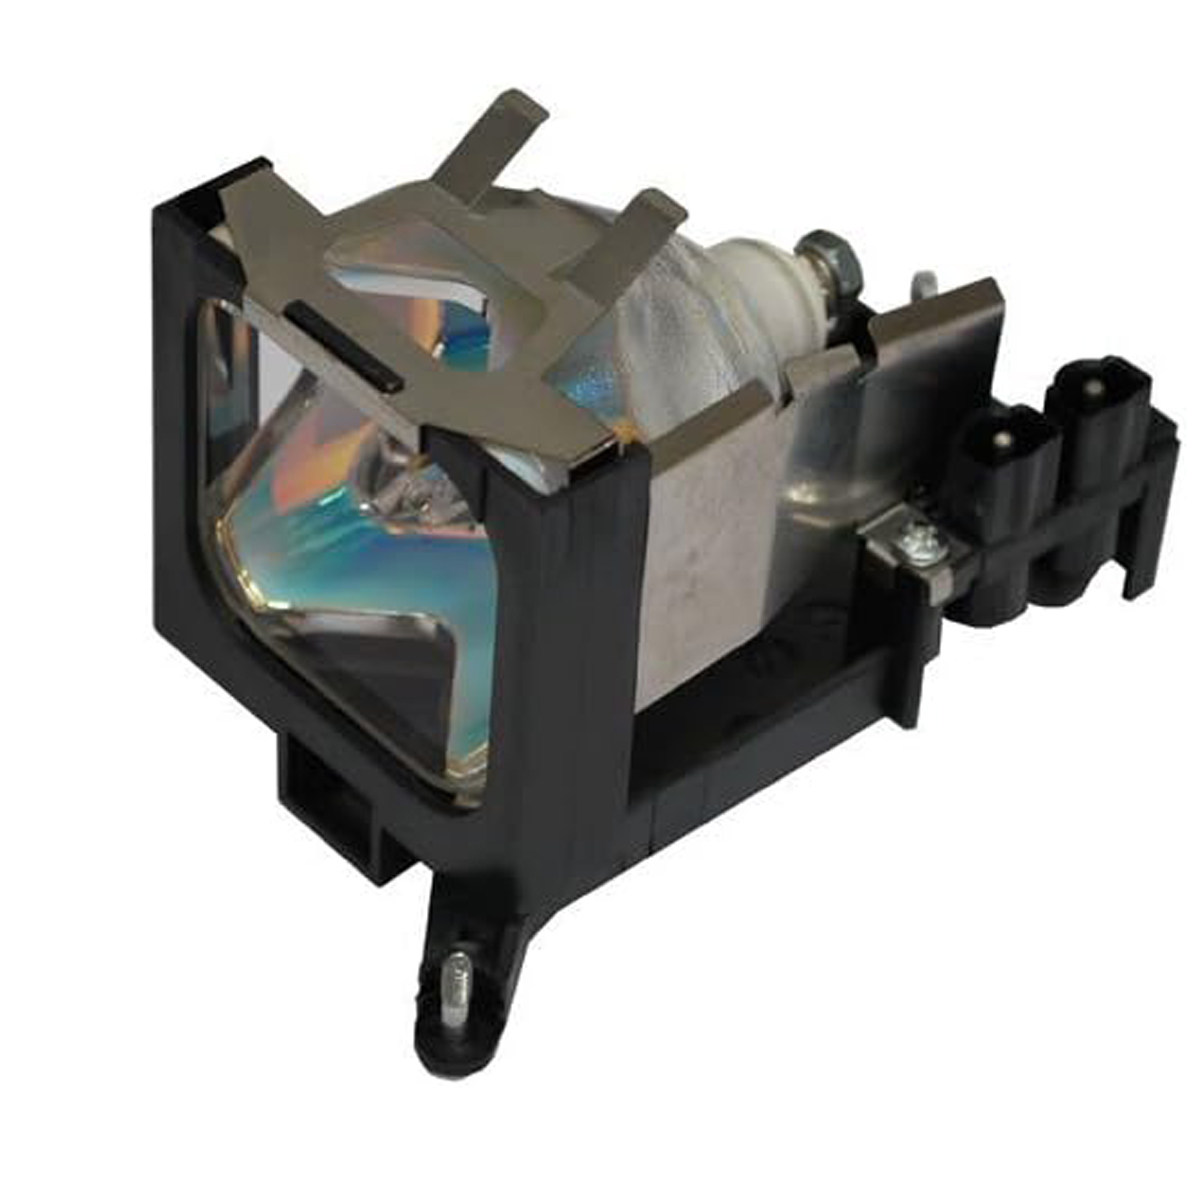 Replacement Projector lamp LV-LP20/9431A001AA For CANON LV-S3